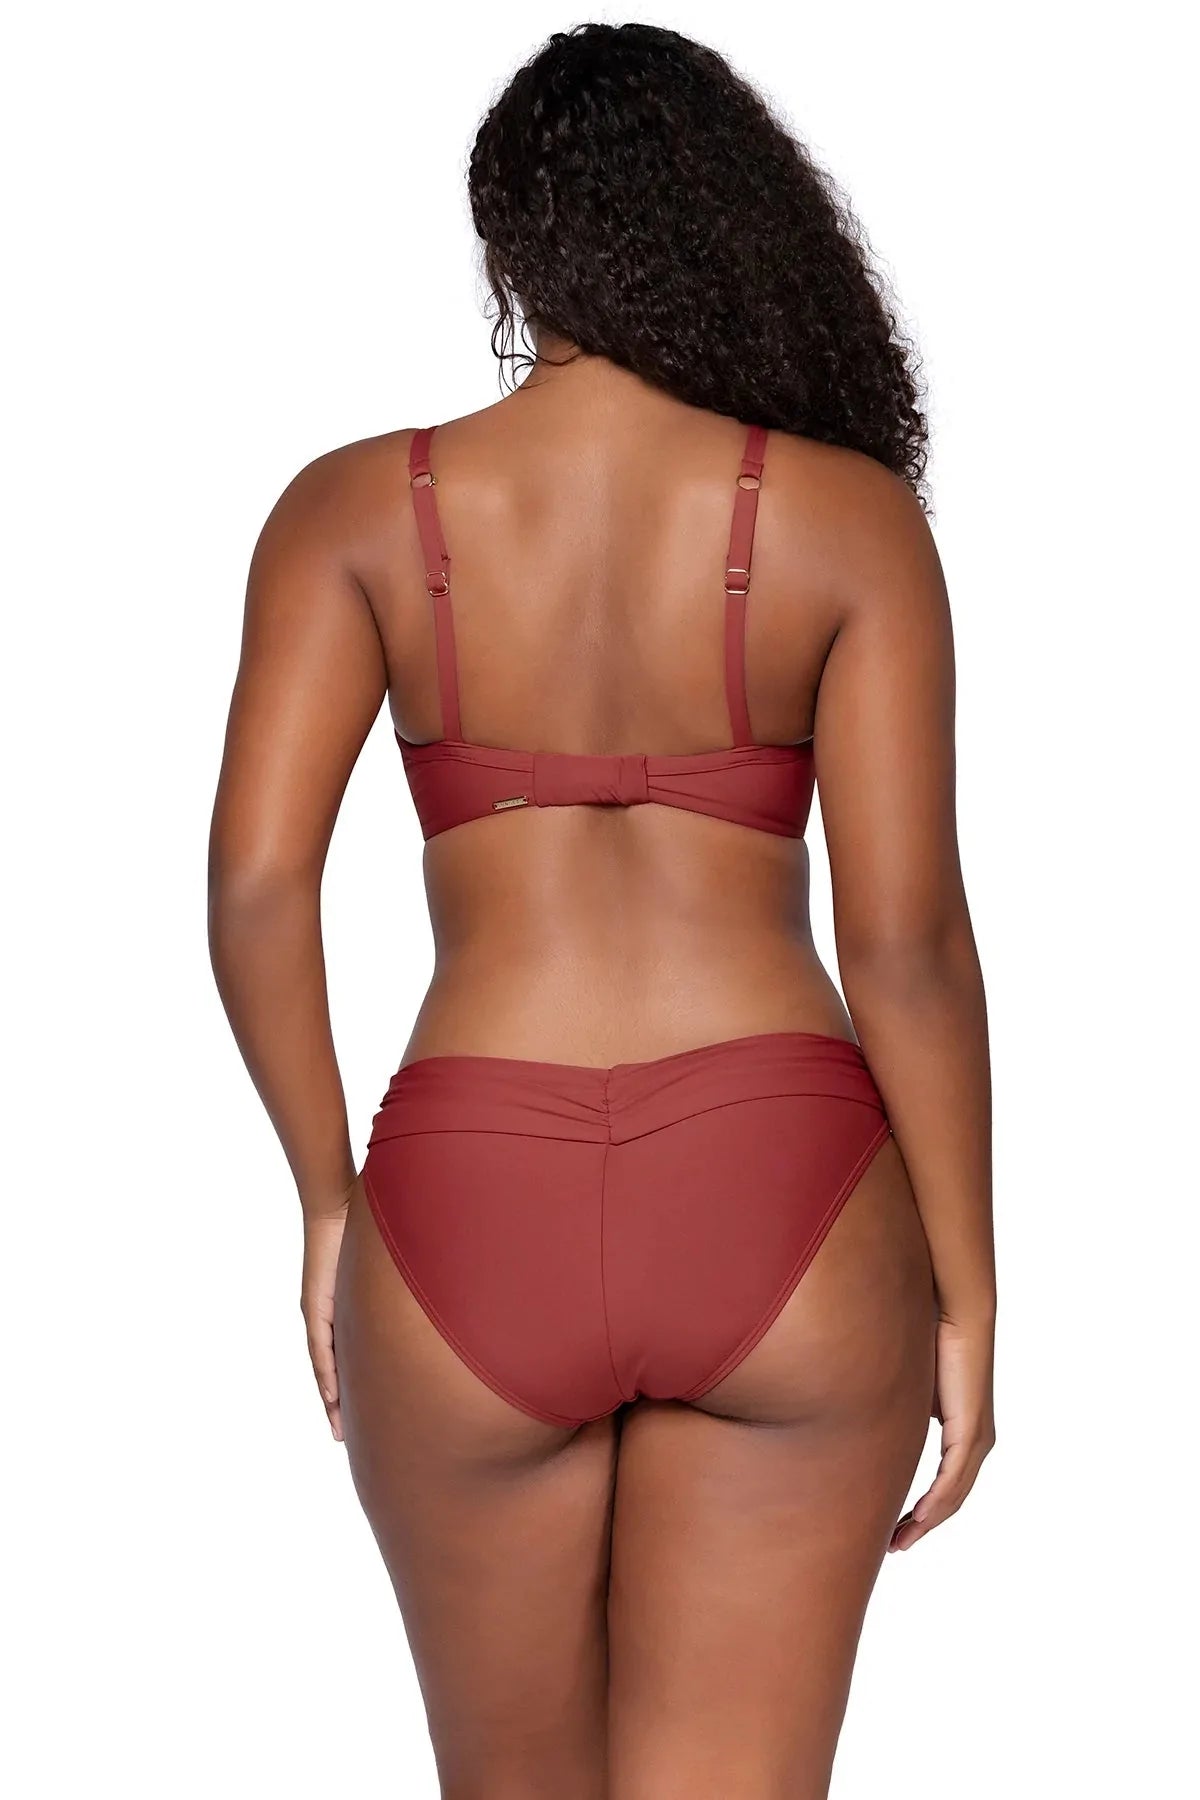 Sunsets Escape "Brands,Swimwear" XS / TUSRE / 27B Sunsets Tuscan Red Unforgettable Bottom